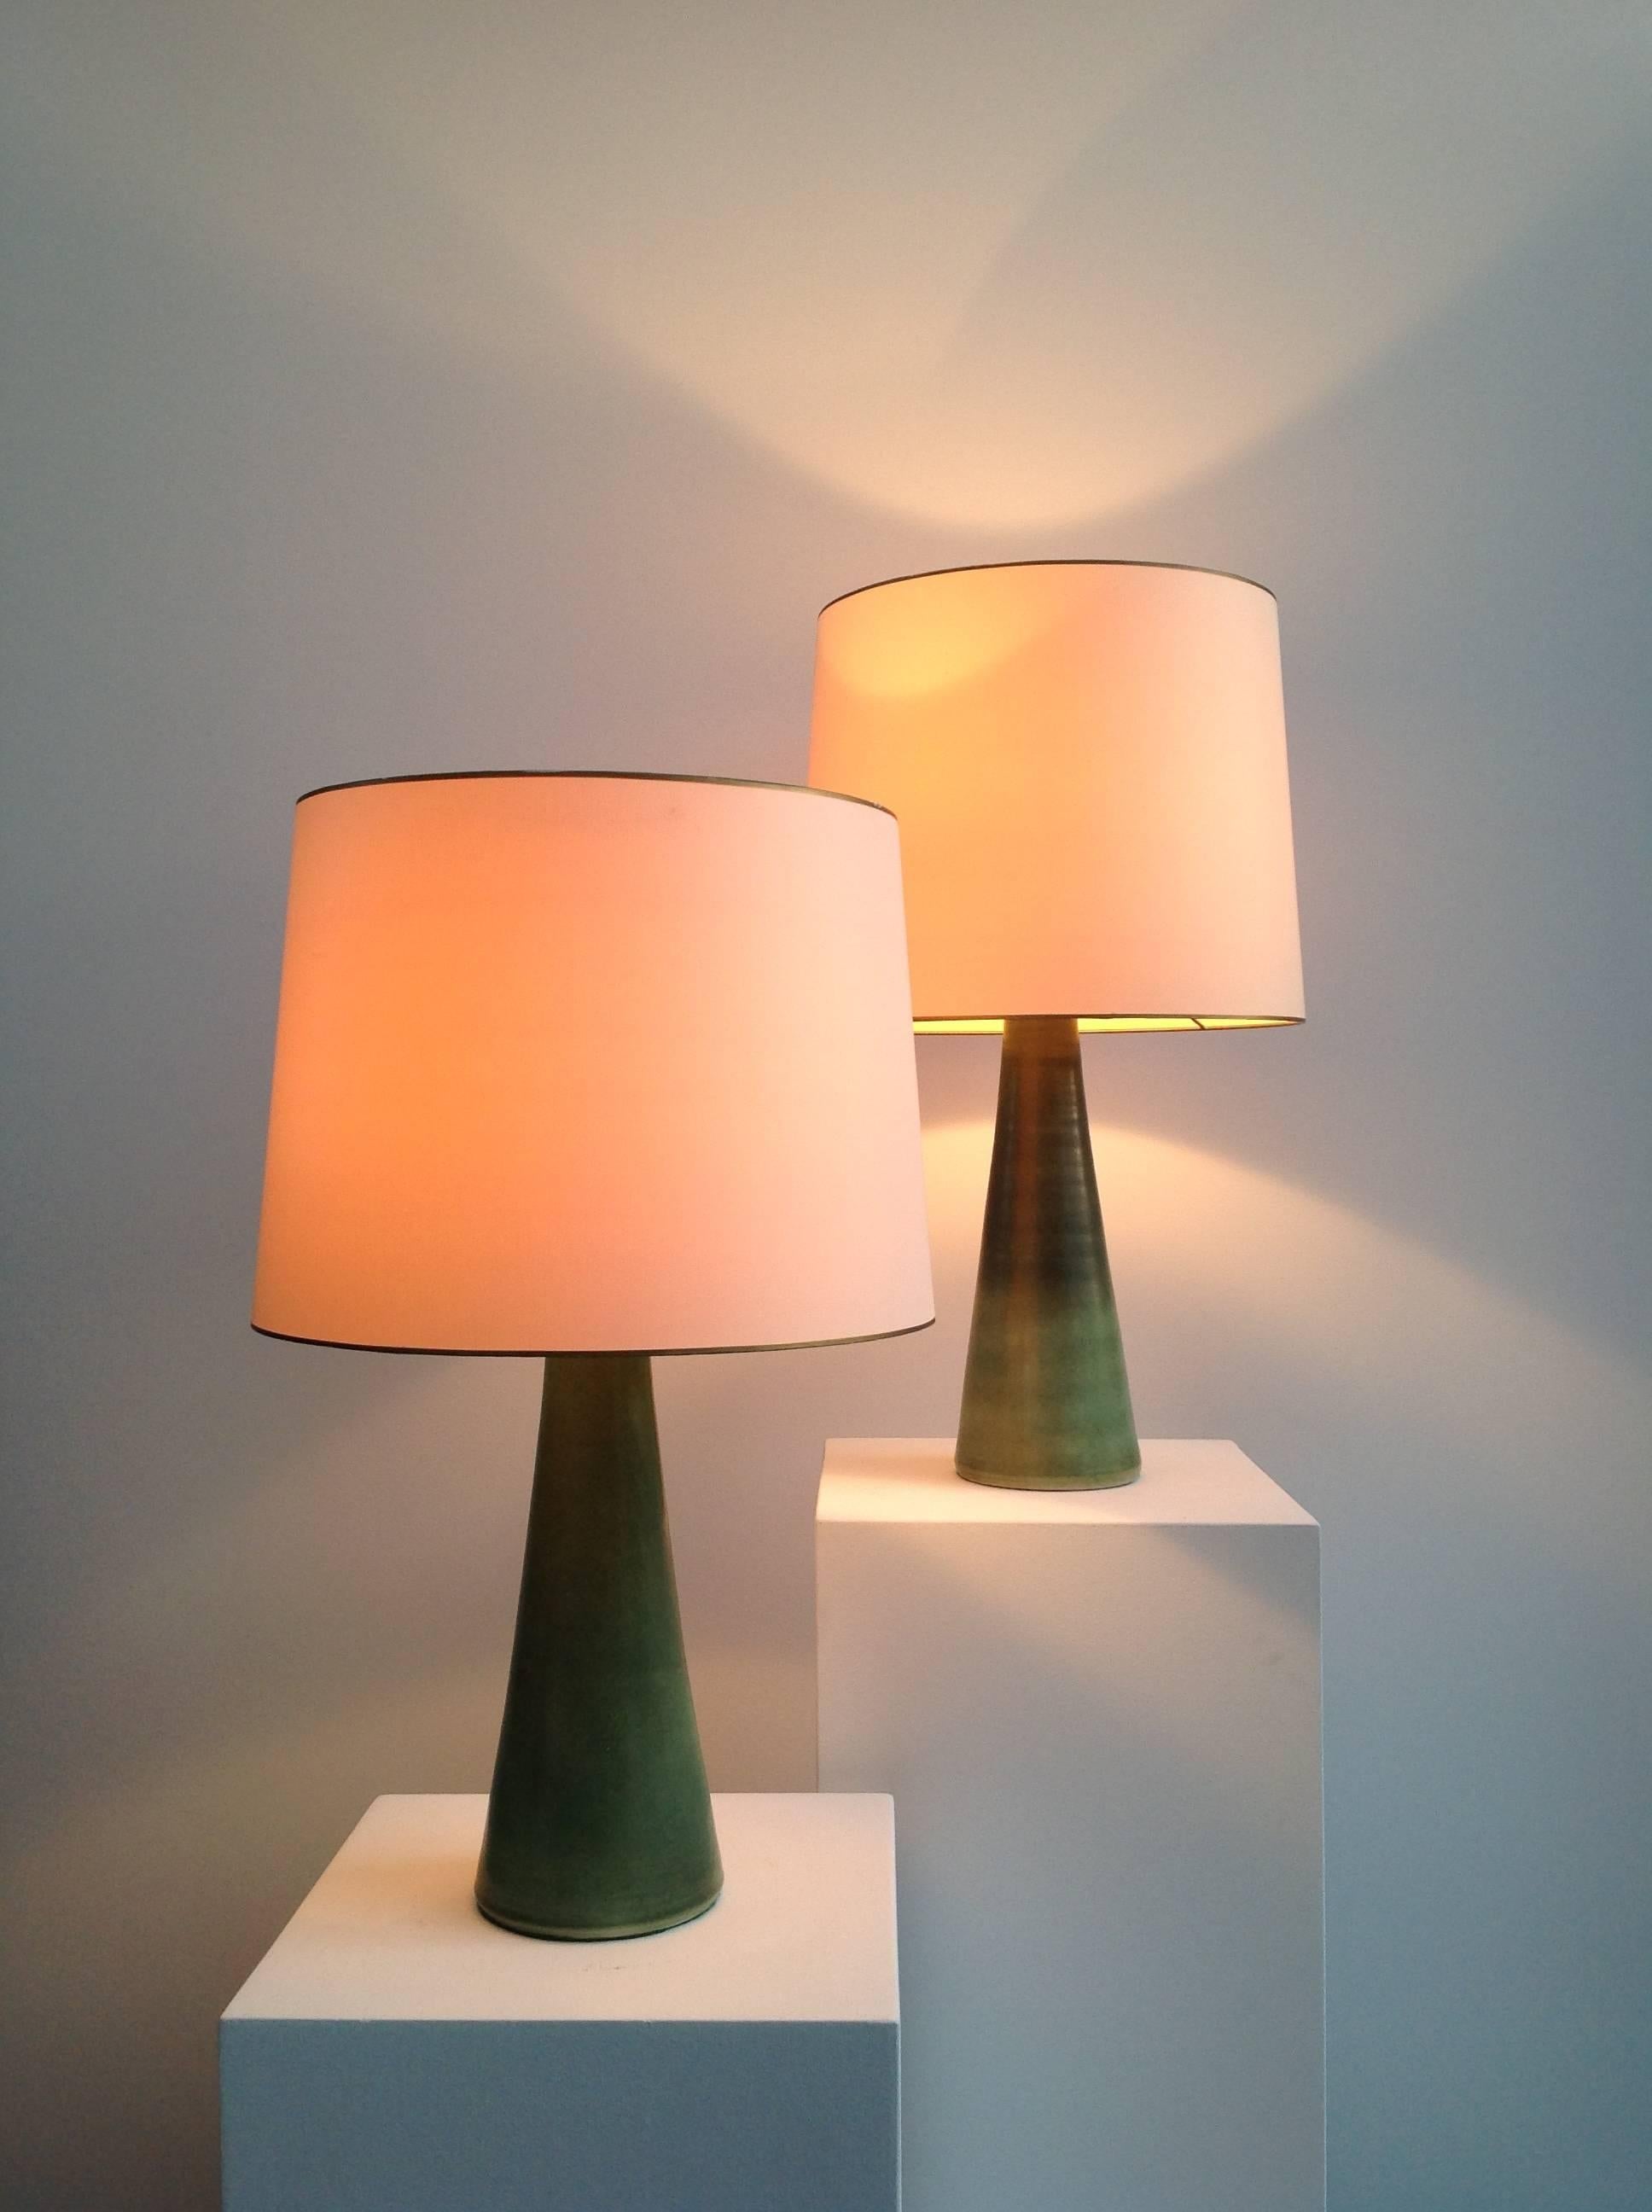 Mid-20th Century Beautiful and Rare Ceramic Lamps by RAAK Amsterdam, Anno, 1960